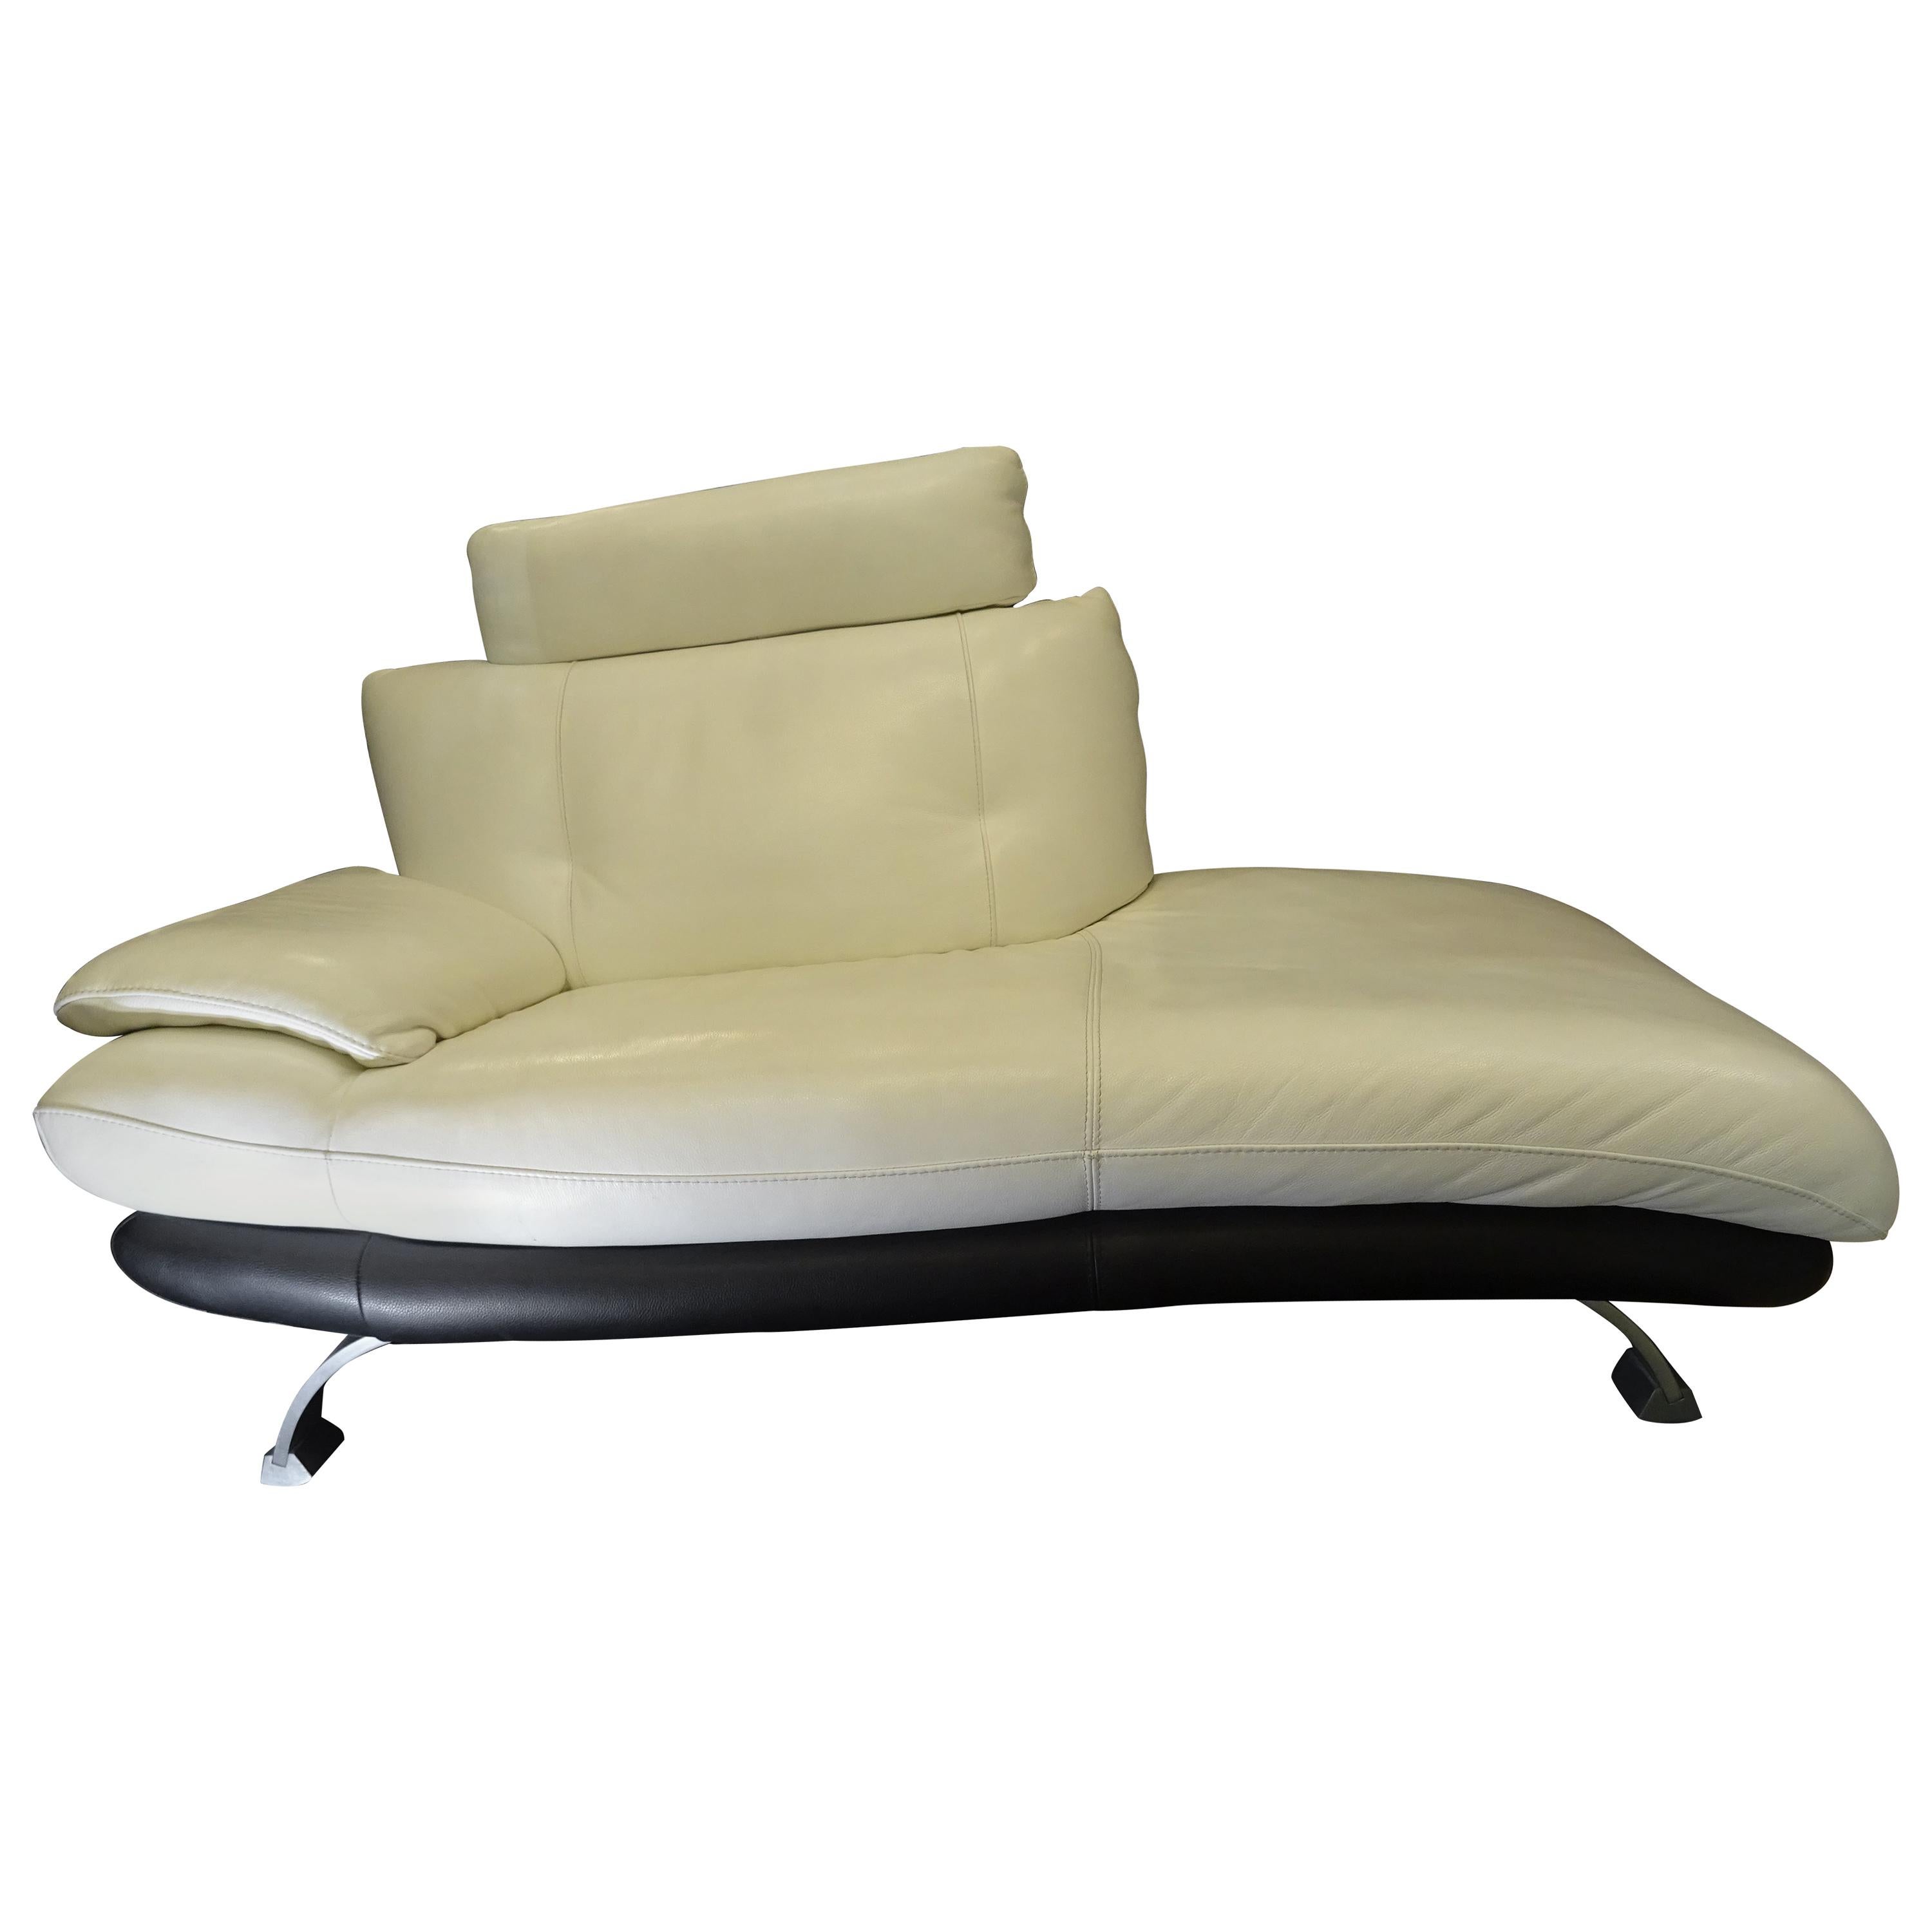 20th Century French White and Black Leather Chaise Longue, Polished Steel Legs